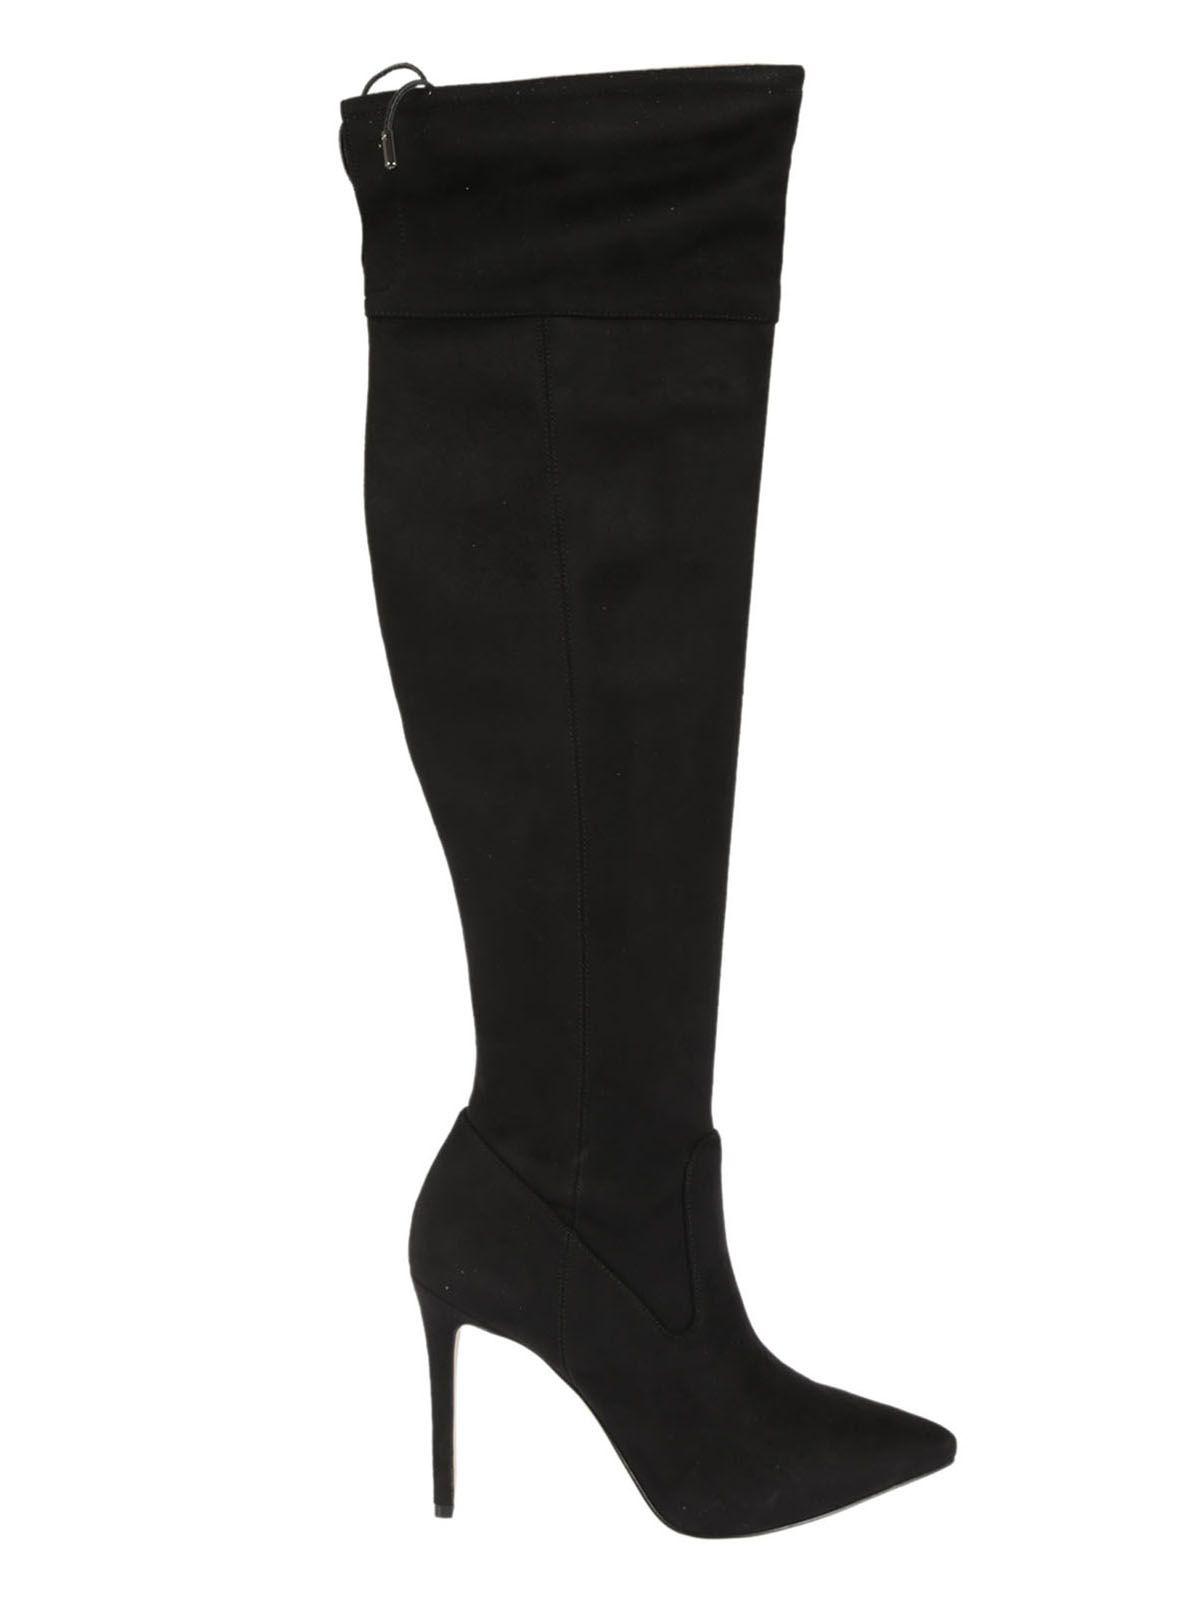 michael kors over the knee boots